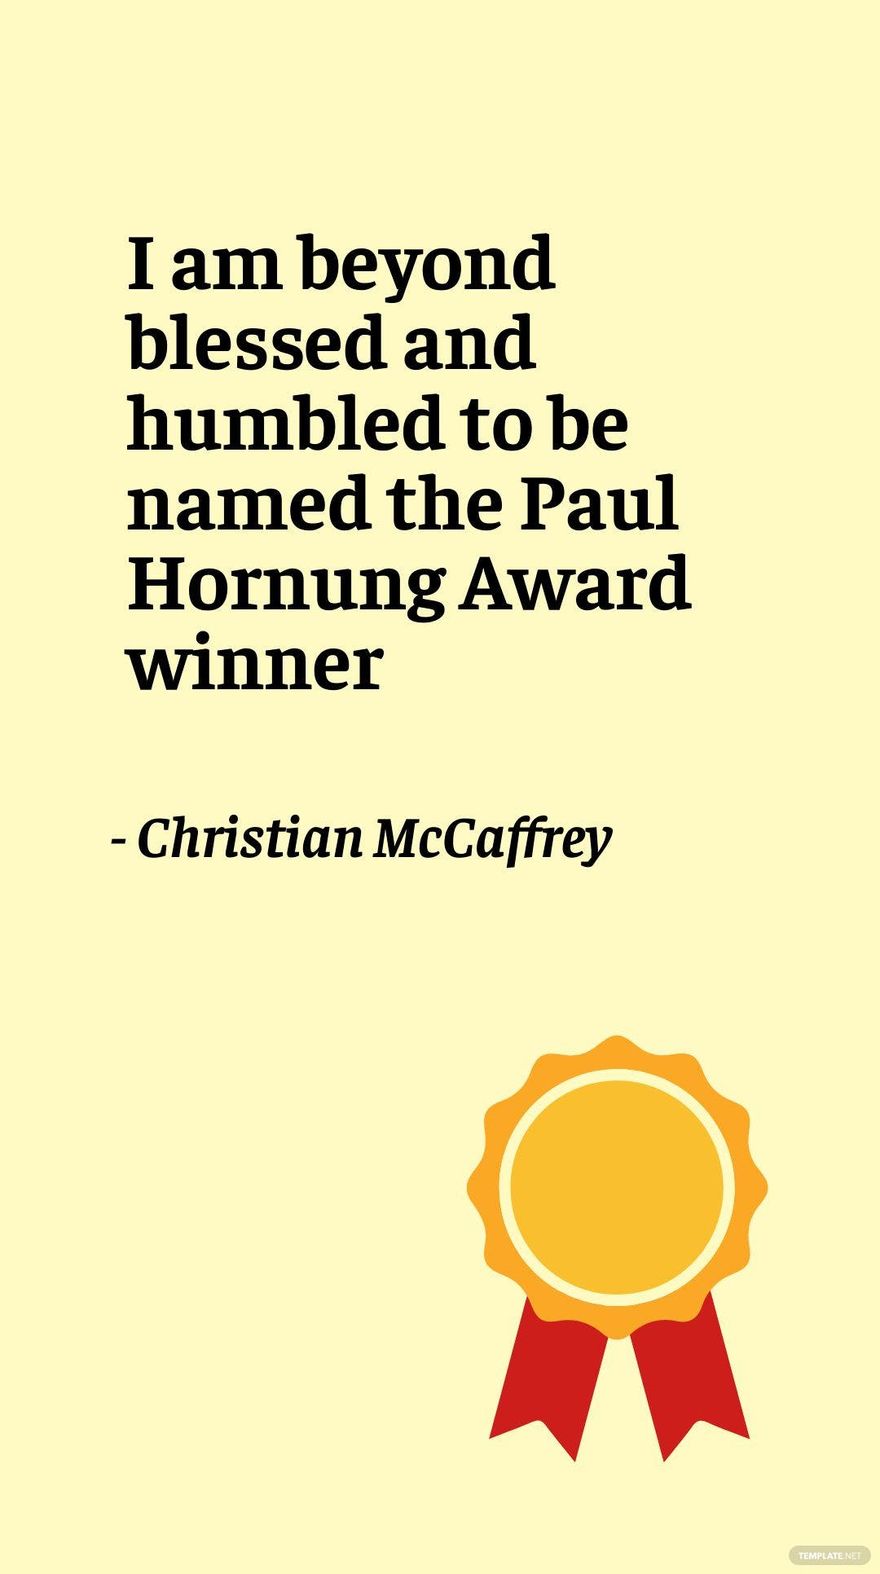 Christian McCaffrey - I am beyond blessed and humbled to be named the Paul Hornung Award winner in JPG